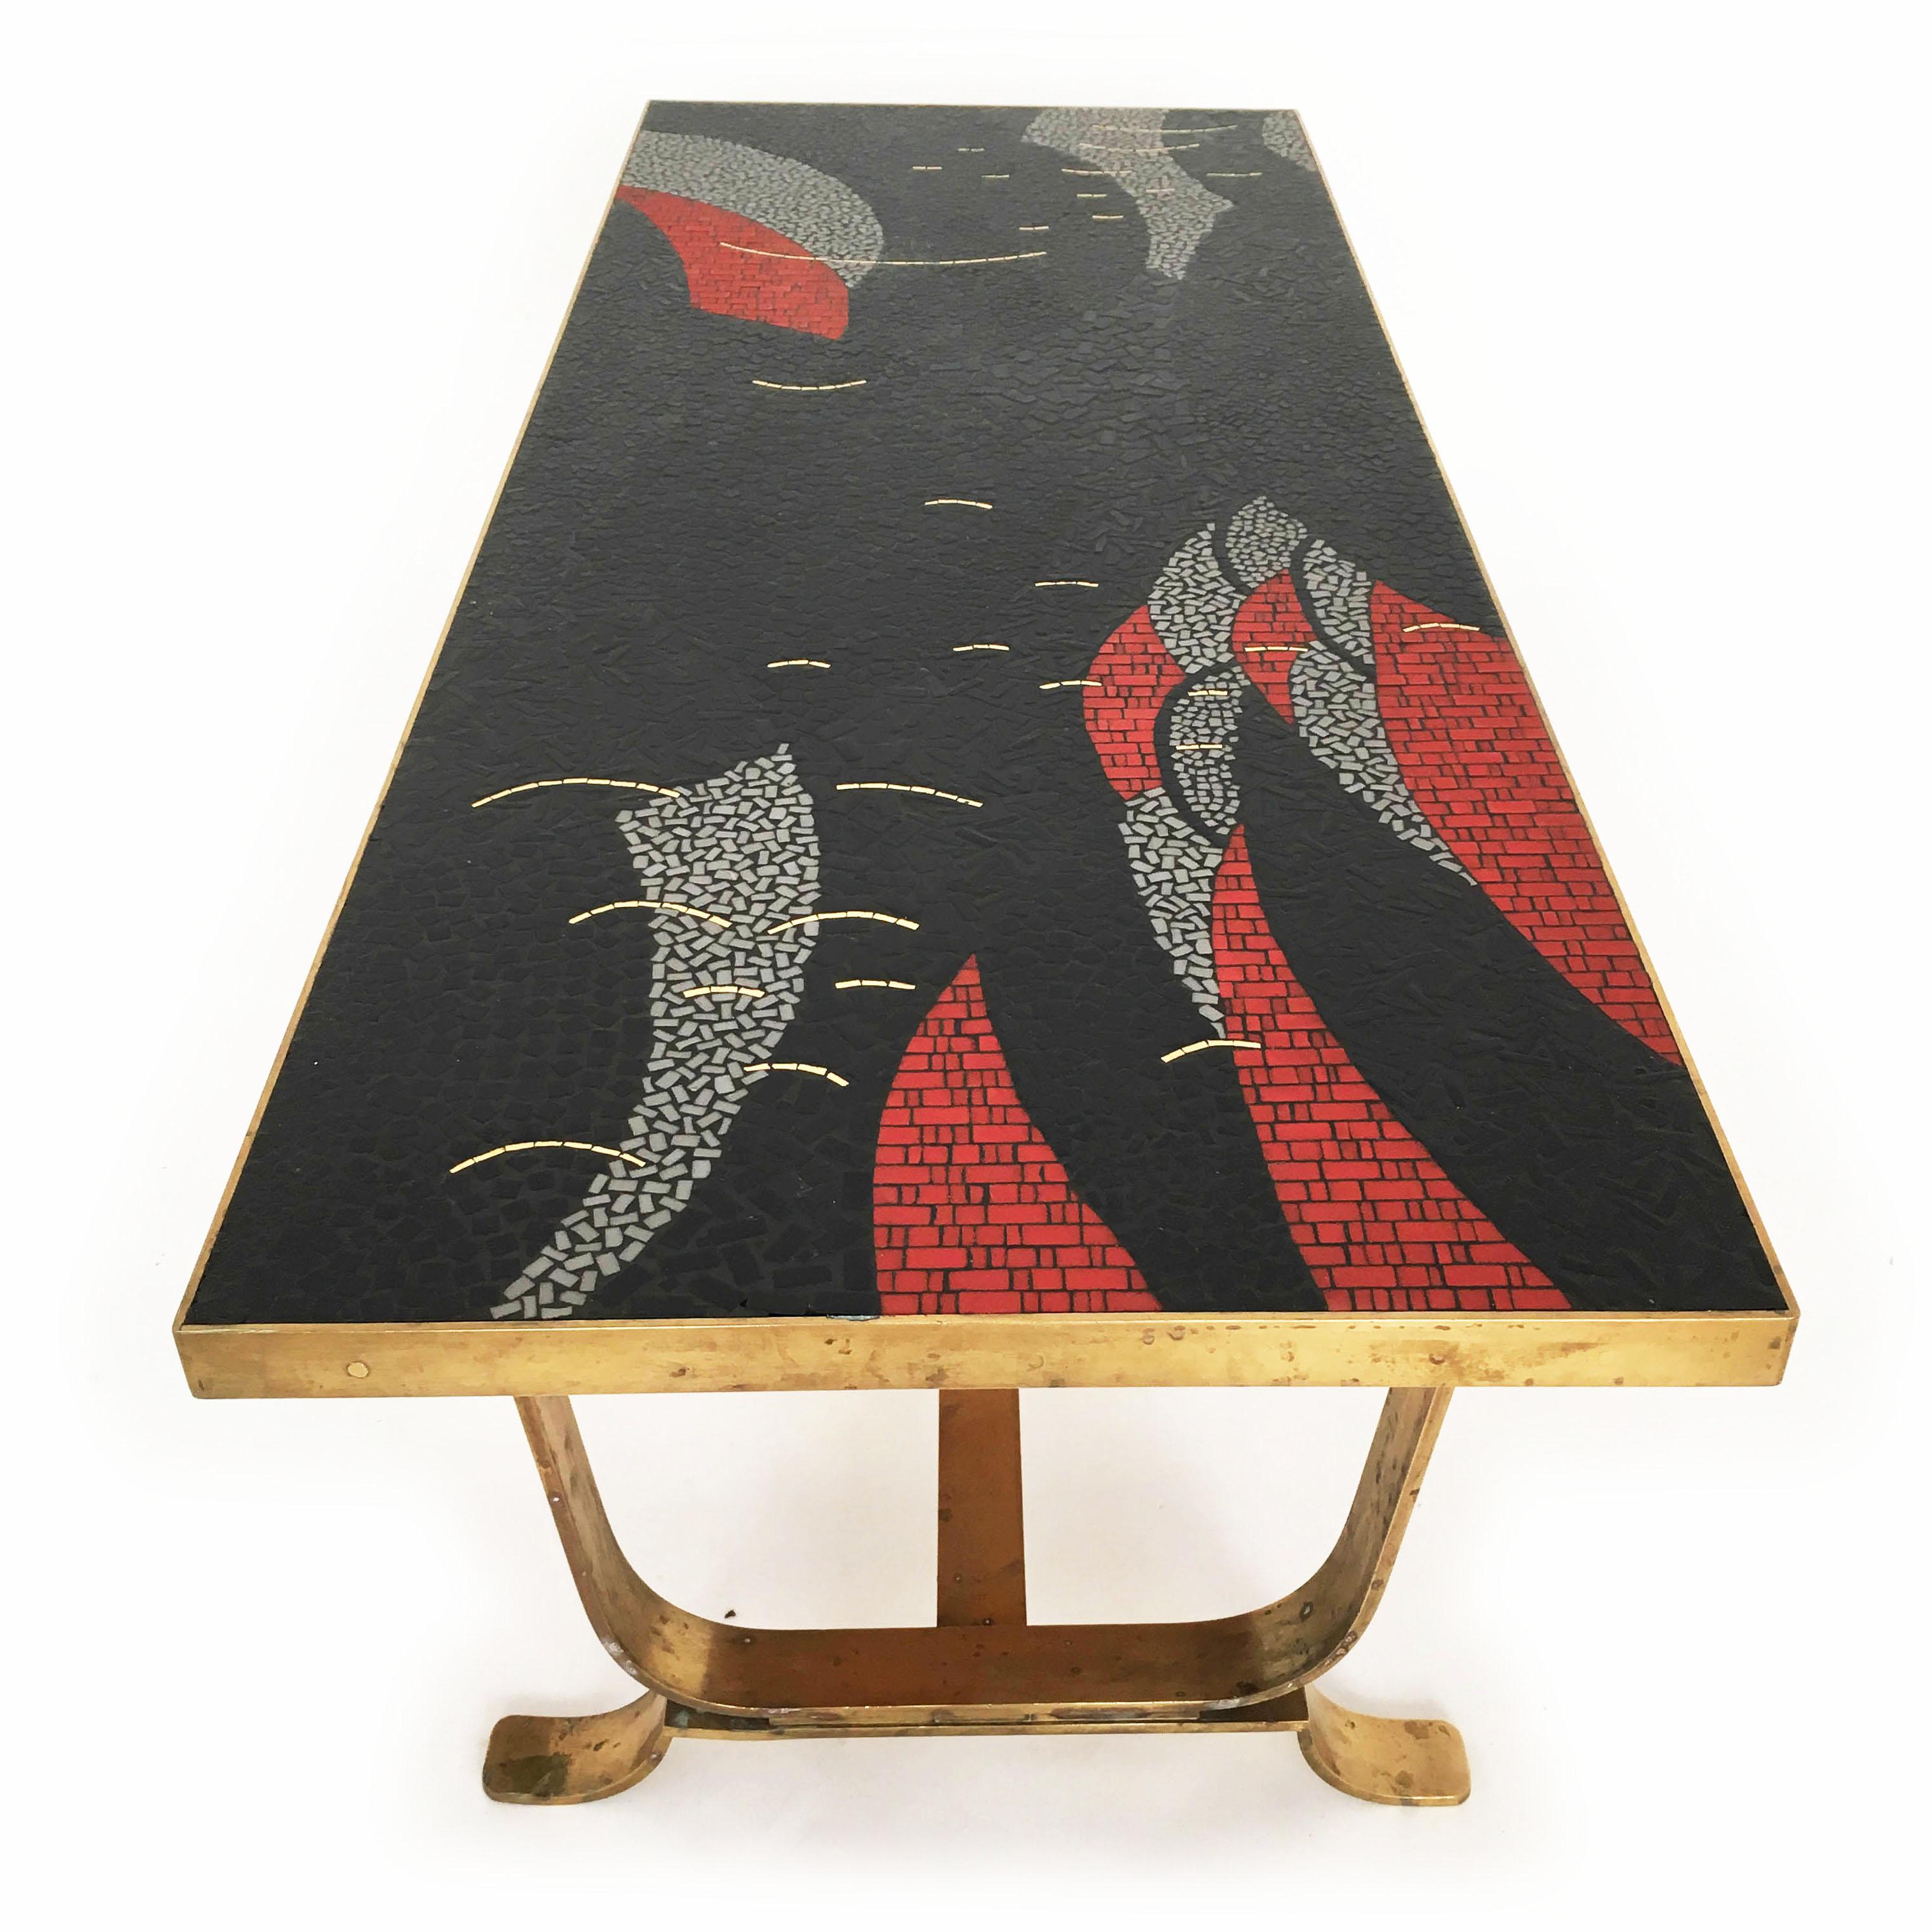 Delicate mosaic design on brass frame coffee table by German Artist Berthold Muller, Germany, 1950s.